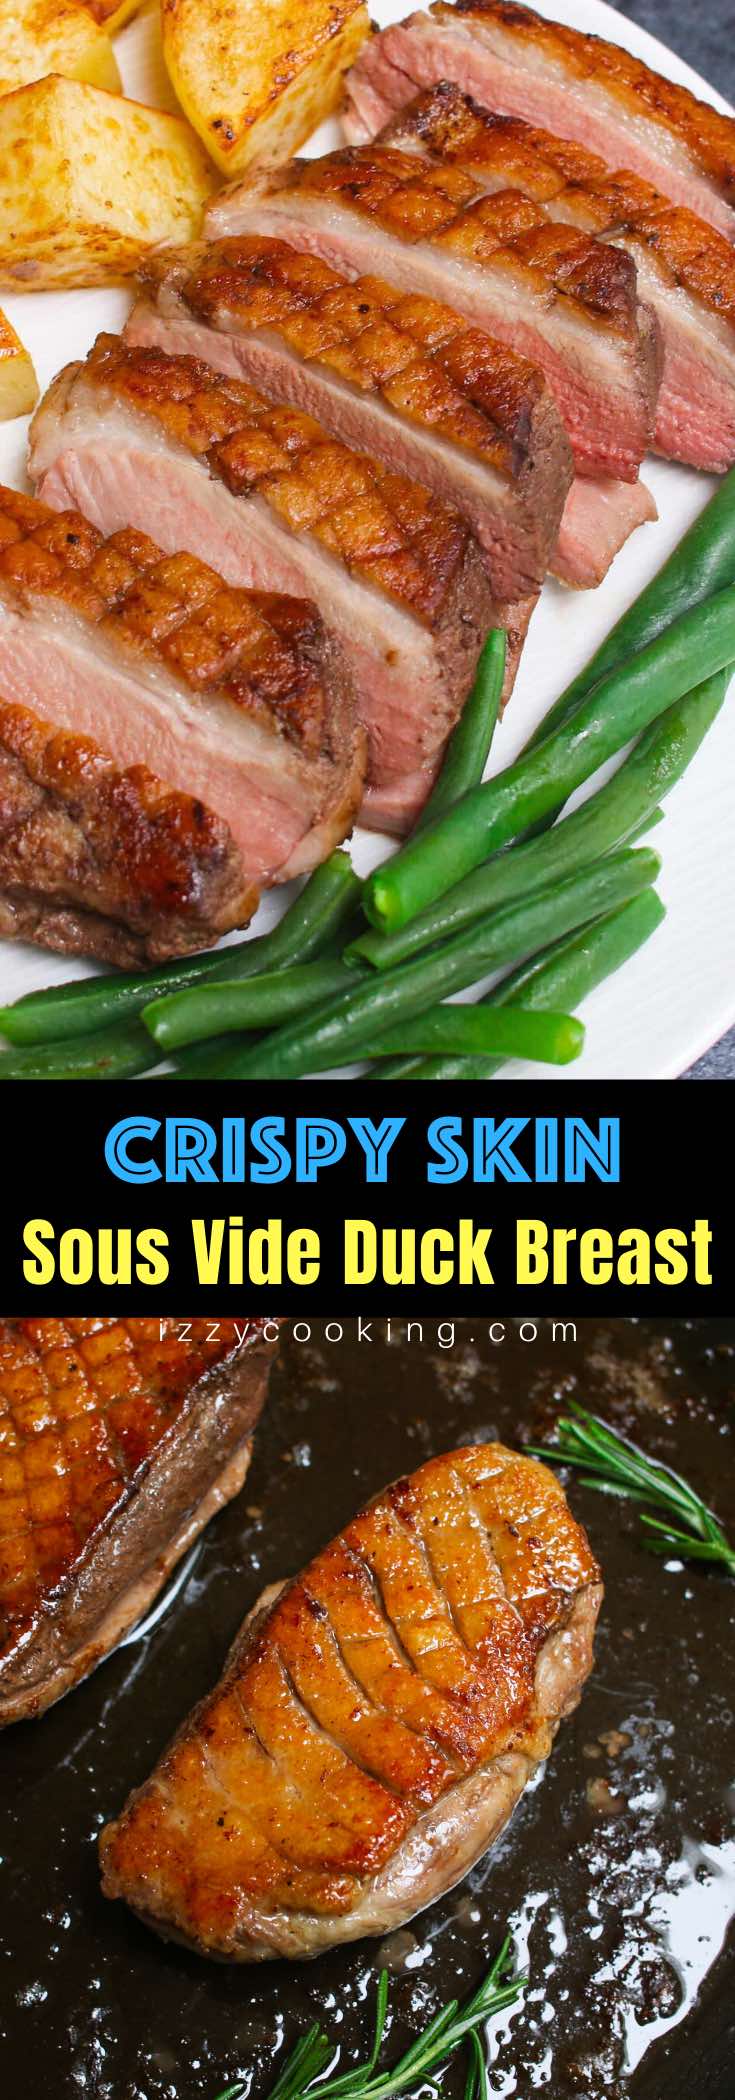 These Sous Vide Duck Breasts have crispy skin on the outside and deeply rich and tender meat on the inside. Sous vide method will have you cooking like a pro, making the restaurant-quality duck breasts at your own home! #SousVideDuckBreast #DuckBreastRecipe